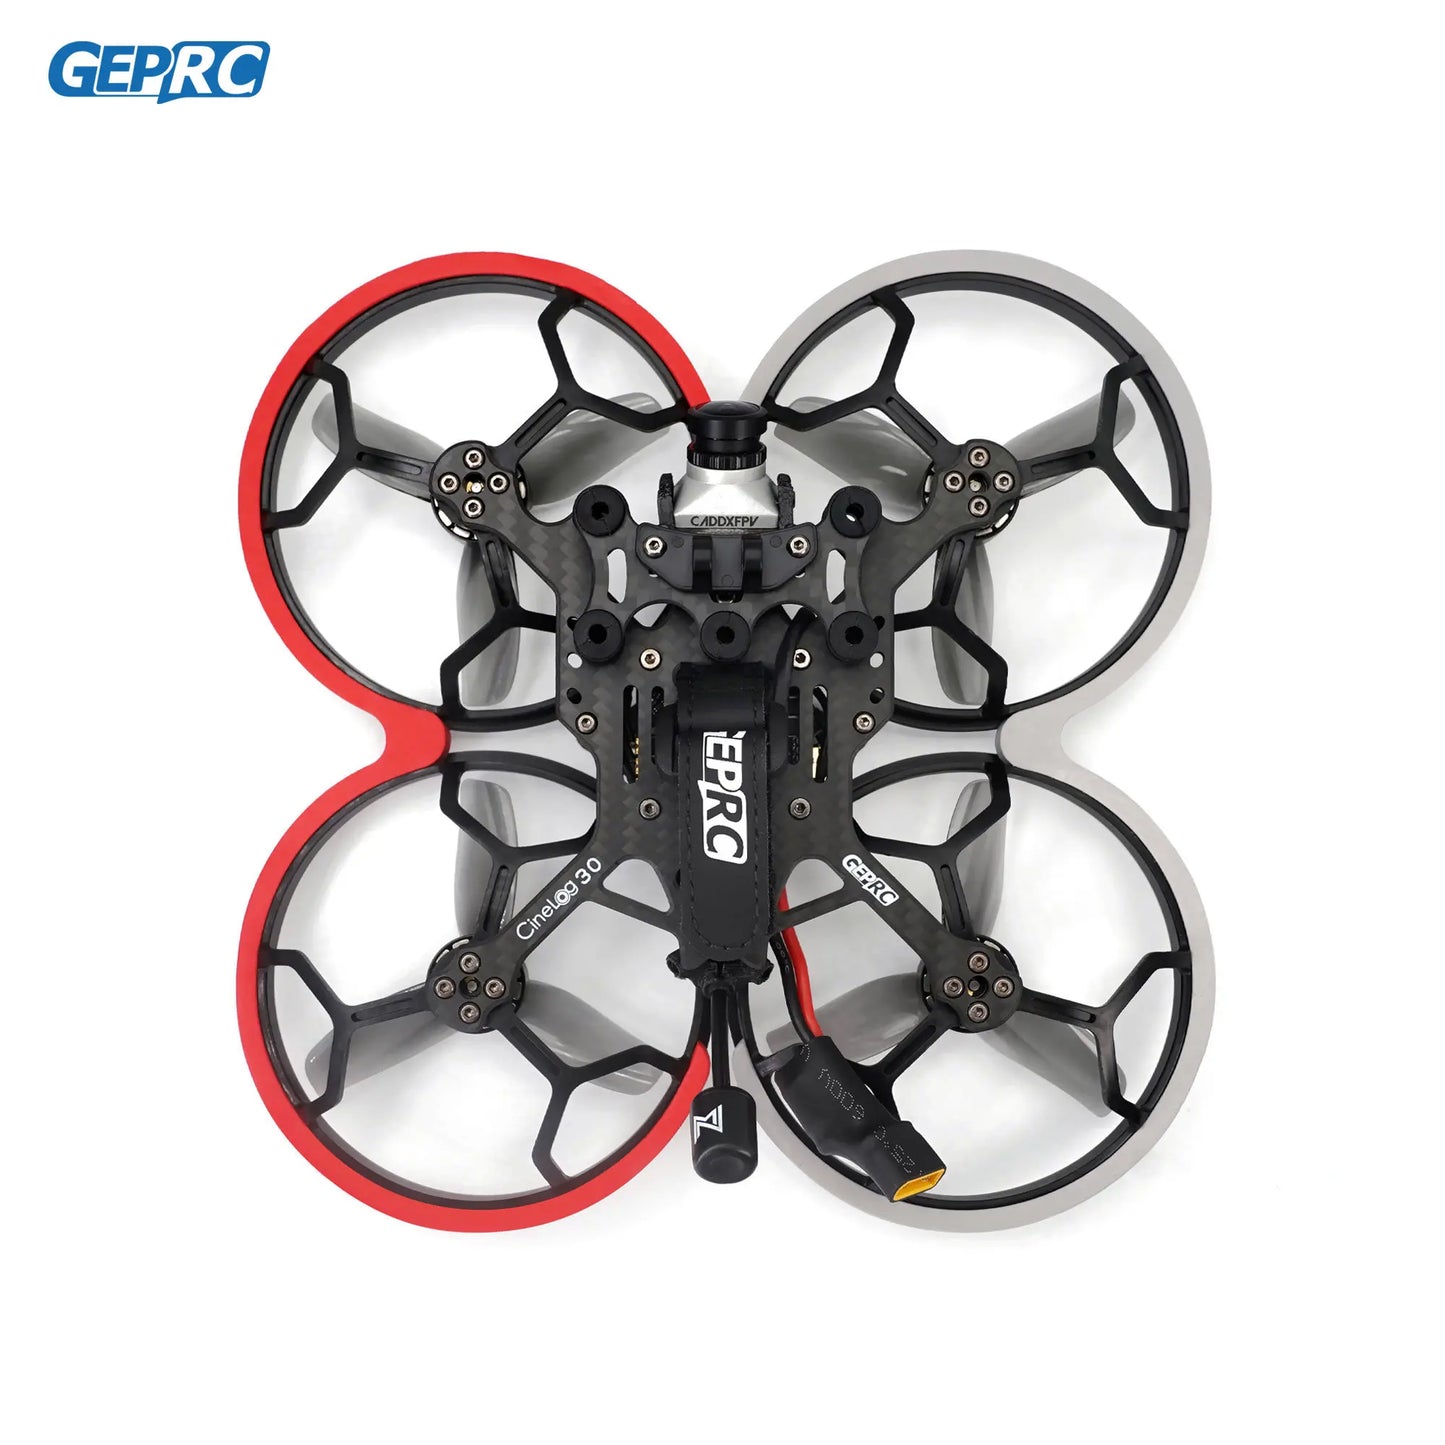 GEPRC CineLog30 HD FPV - WITH Runcam Link Wasp Vista Digital HD System Cinewhoop Camera for RC FPV Quadcopter Freestyle Drone